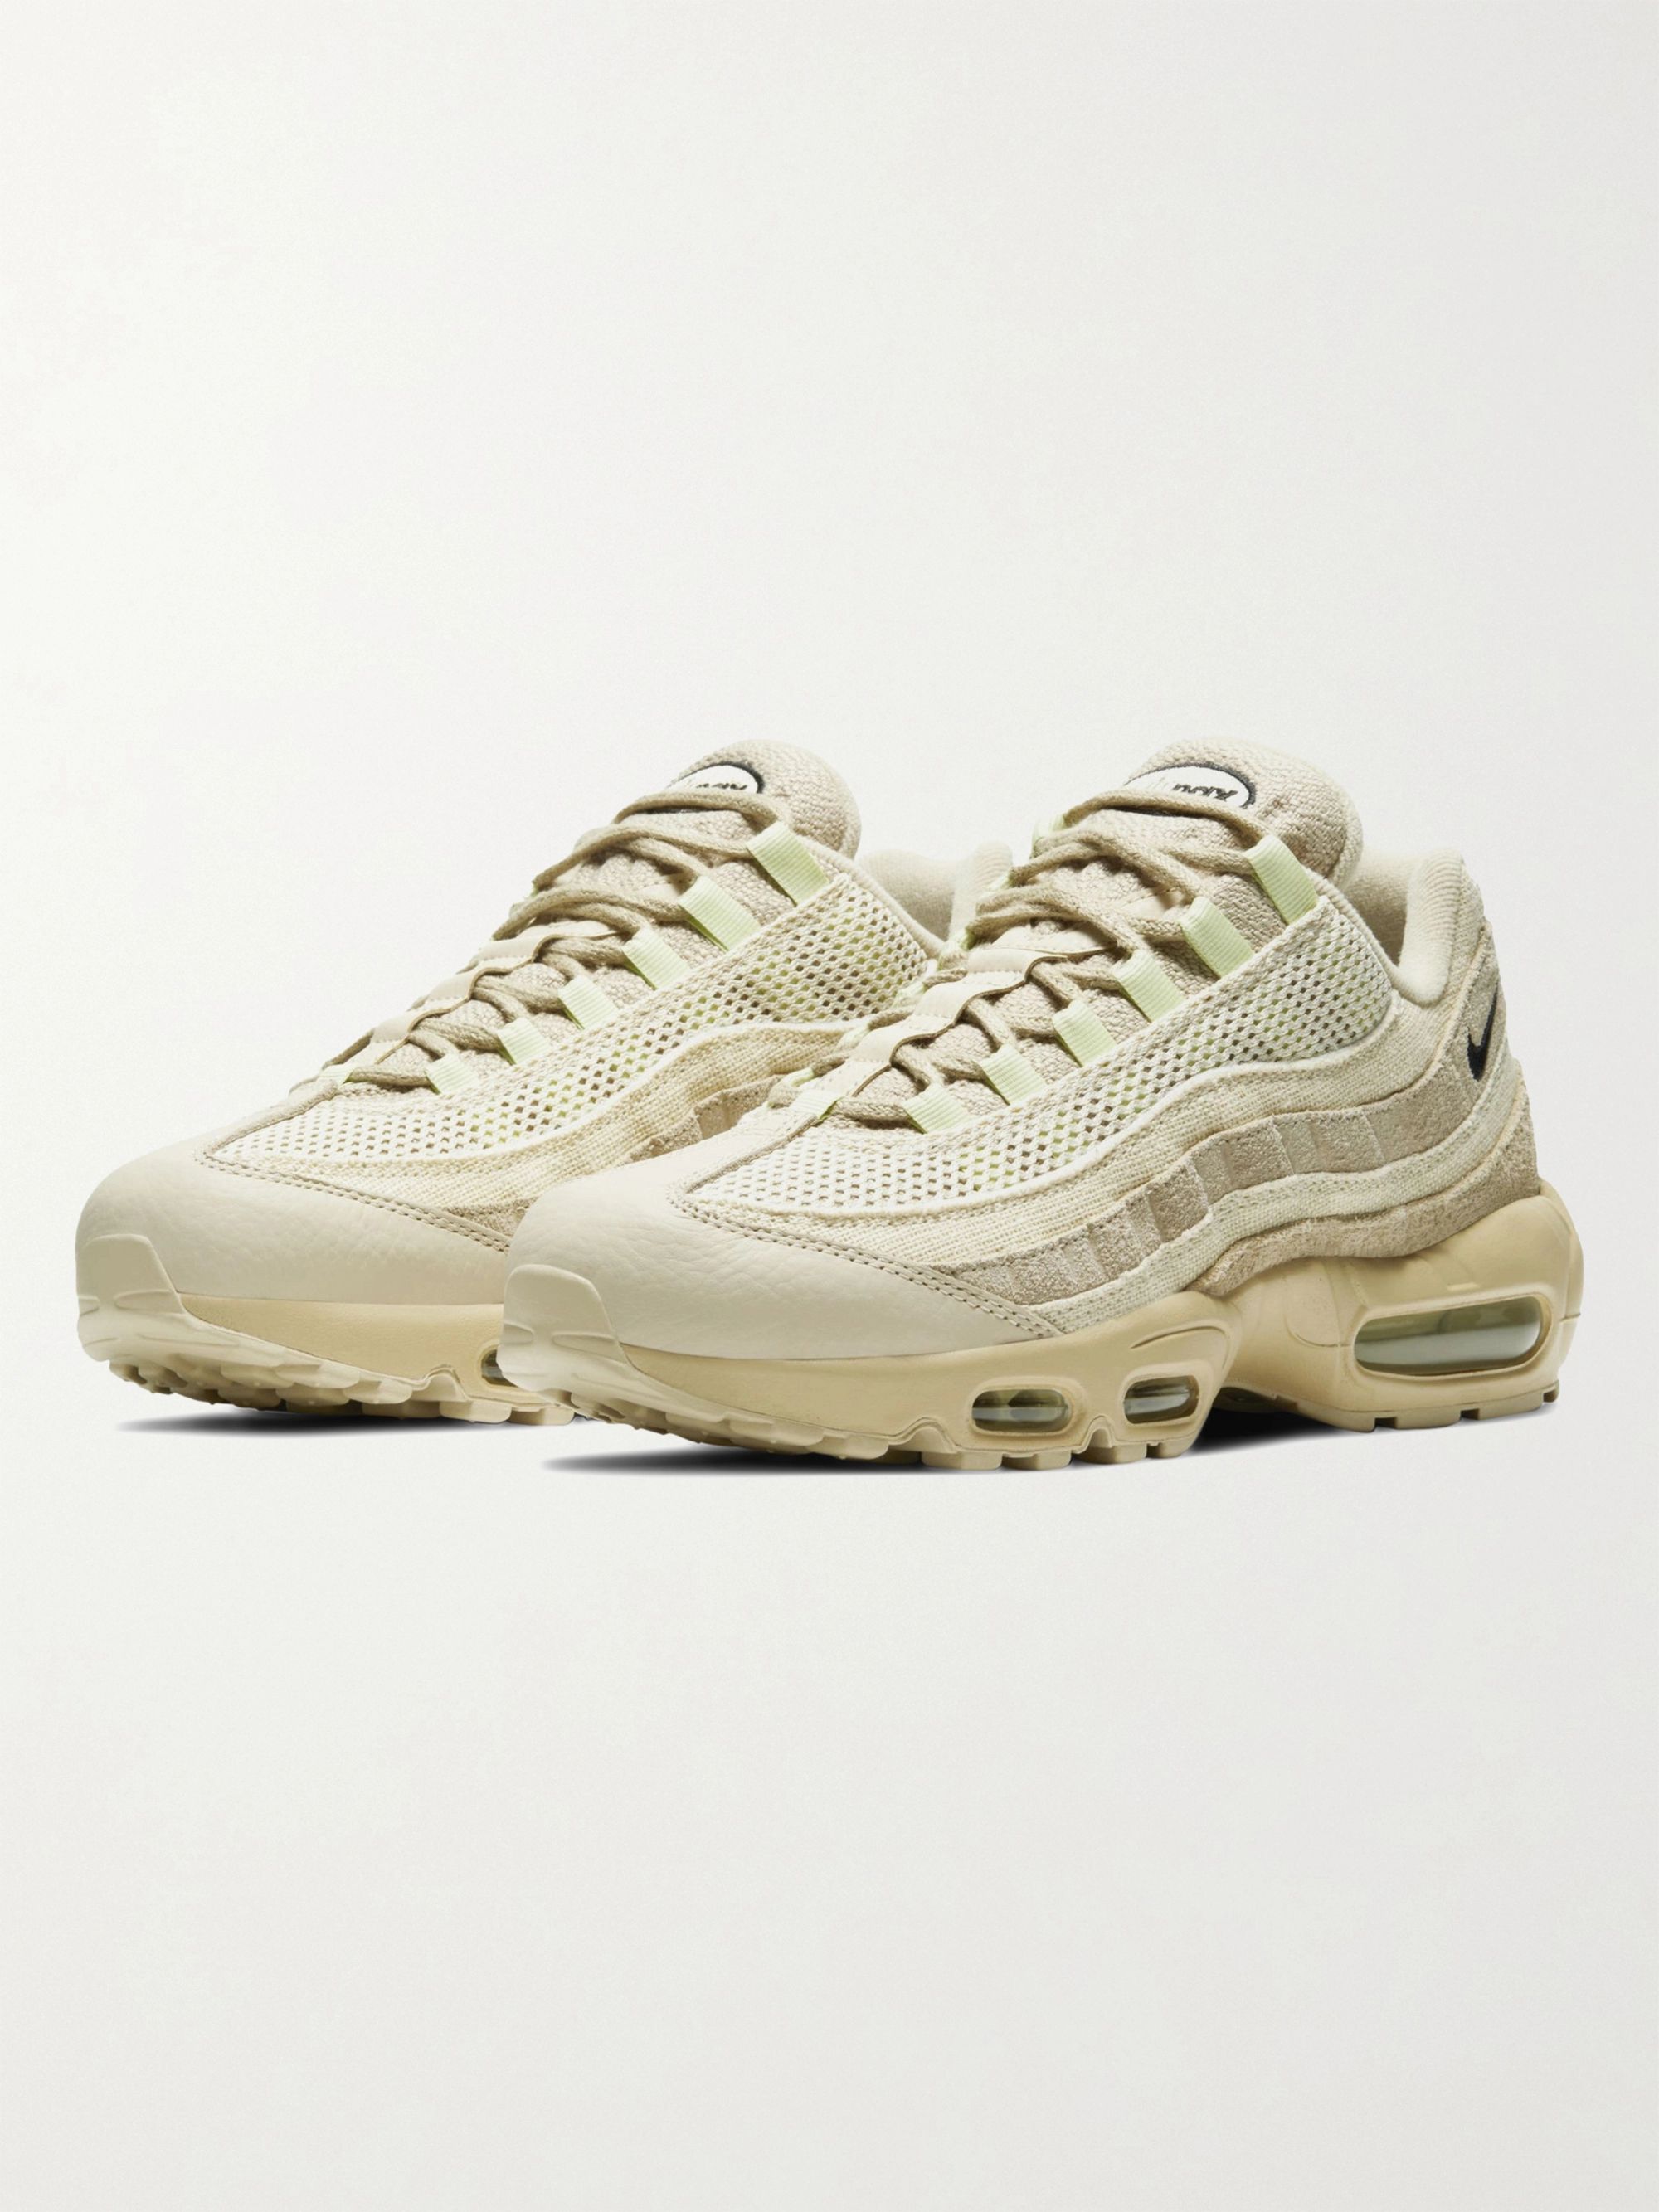 Air Max 95 PRM Leather, Suede and Mesh Sneakers